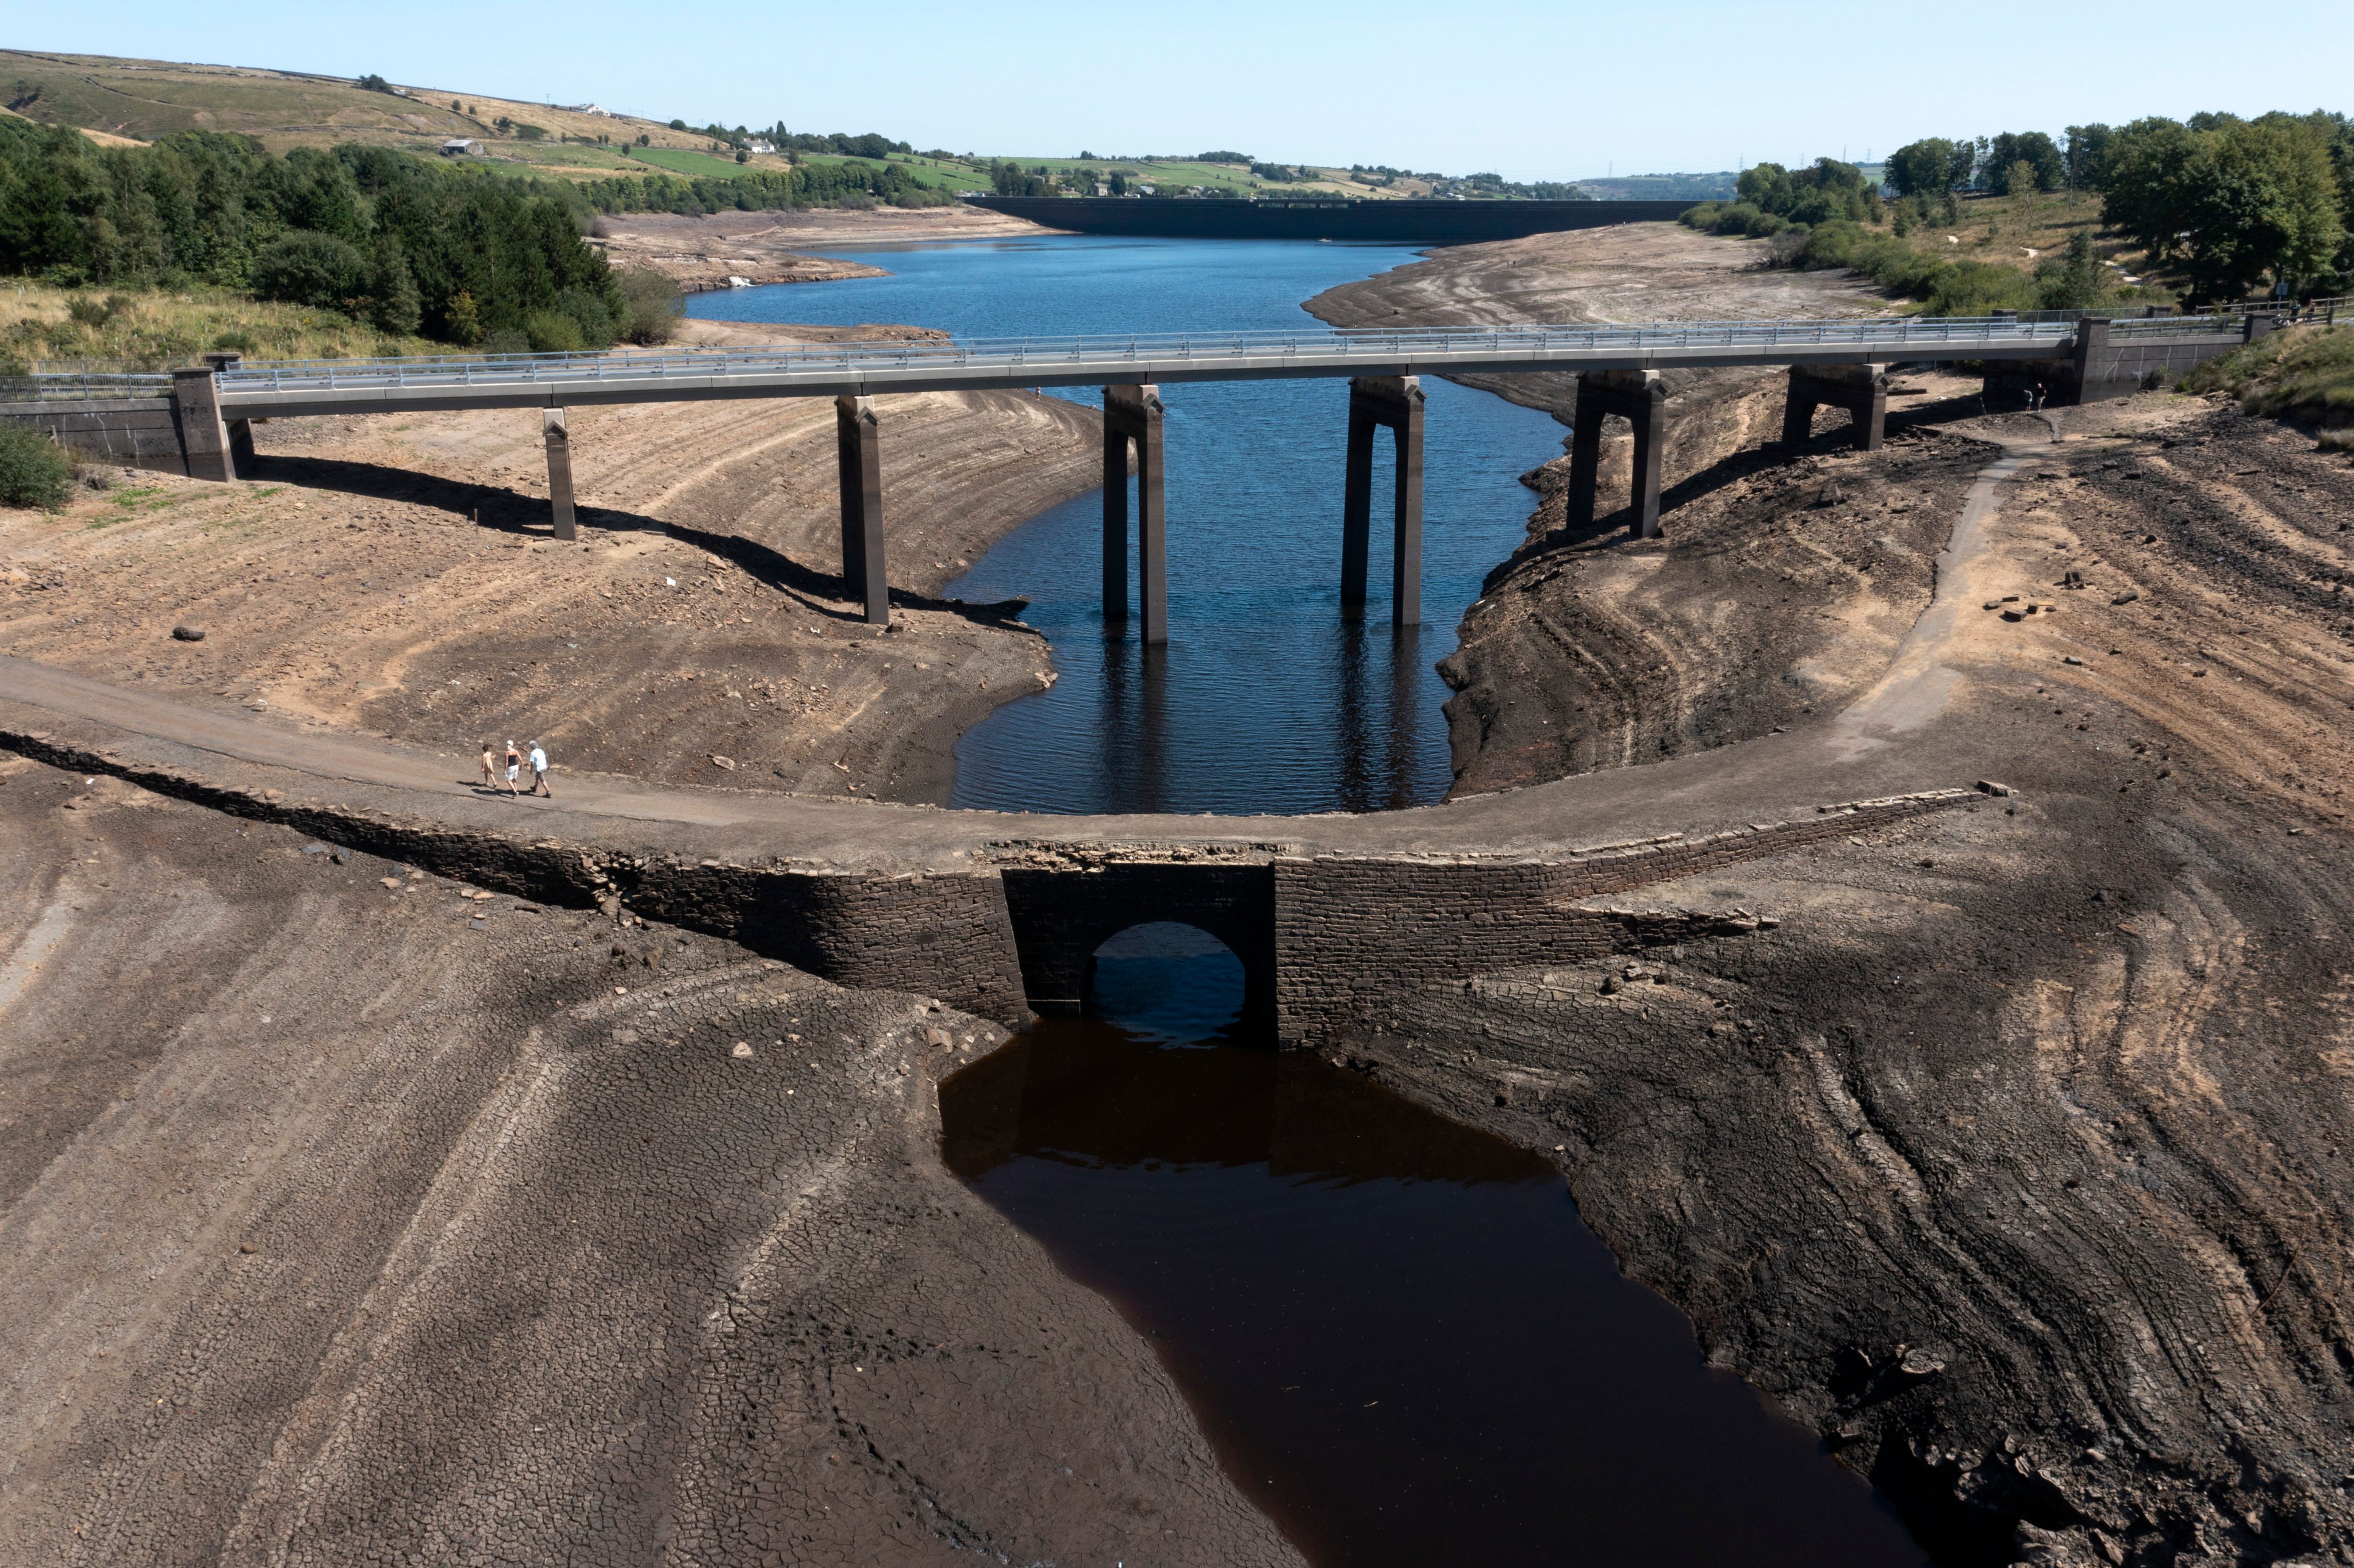 Low water levels at the Baitings Reservoir in Yorkshire, England, have revealed the remains of an ancient road. Photo: AP